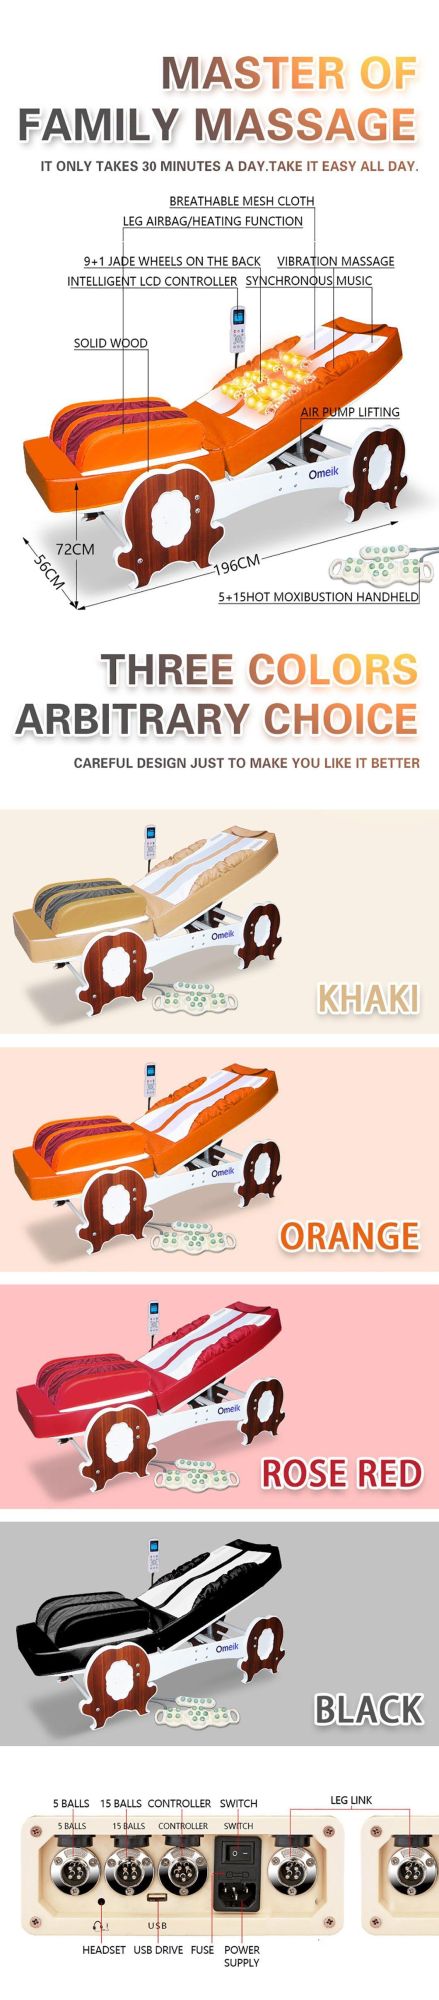 Korea Thermal Jade Massage Bed Health Care Infrared Heating Therapeutic Electric Jade Stone Roller Rolling Massage Bed